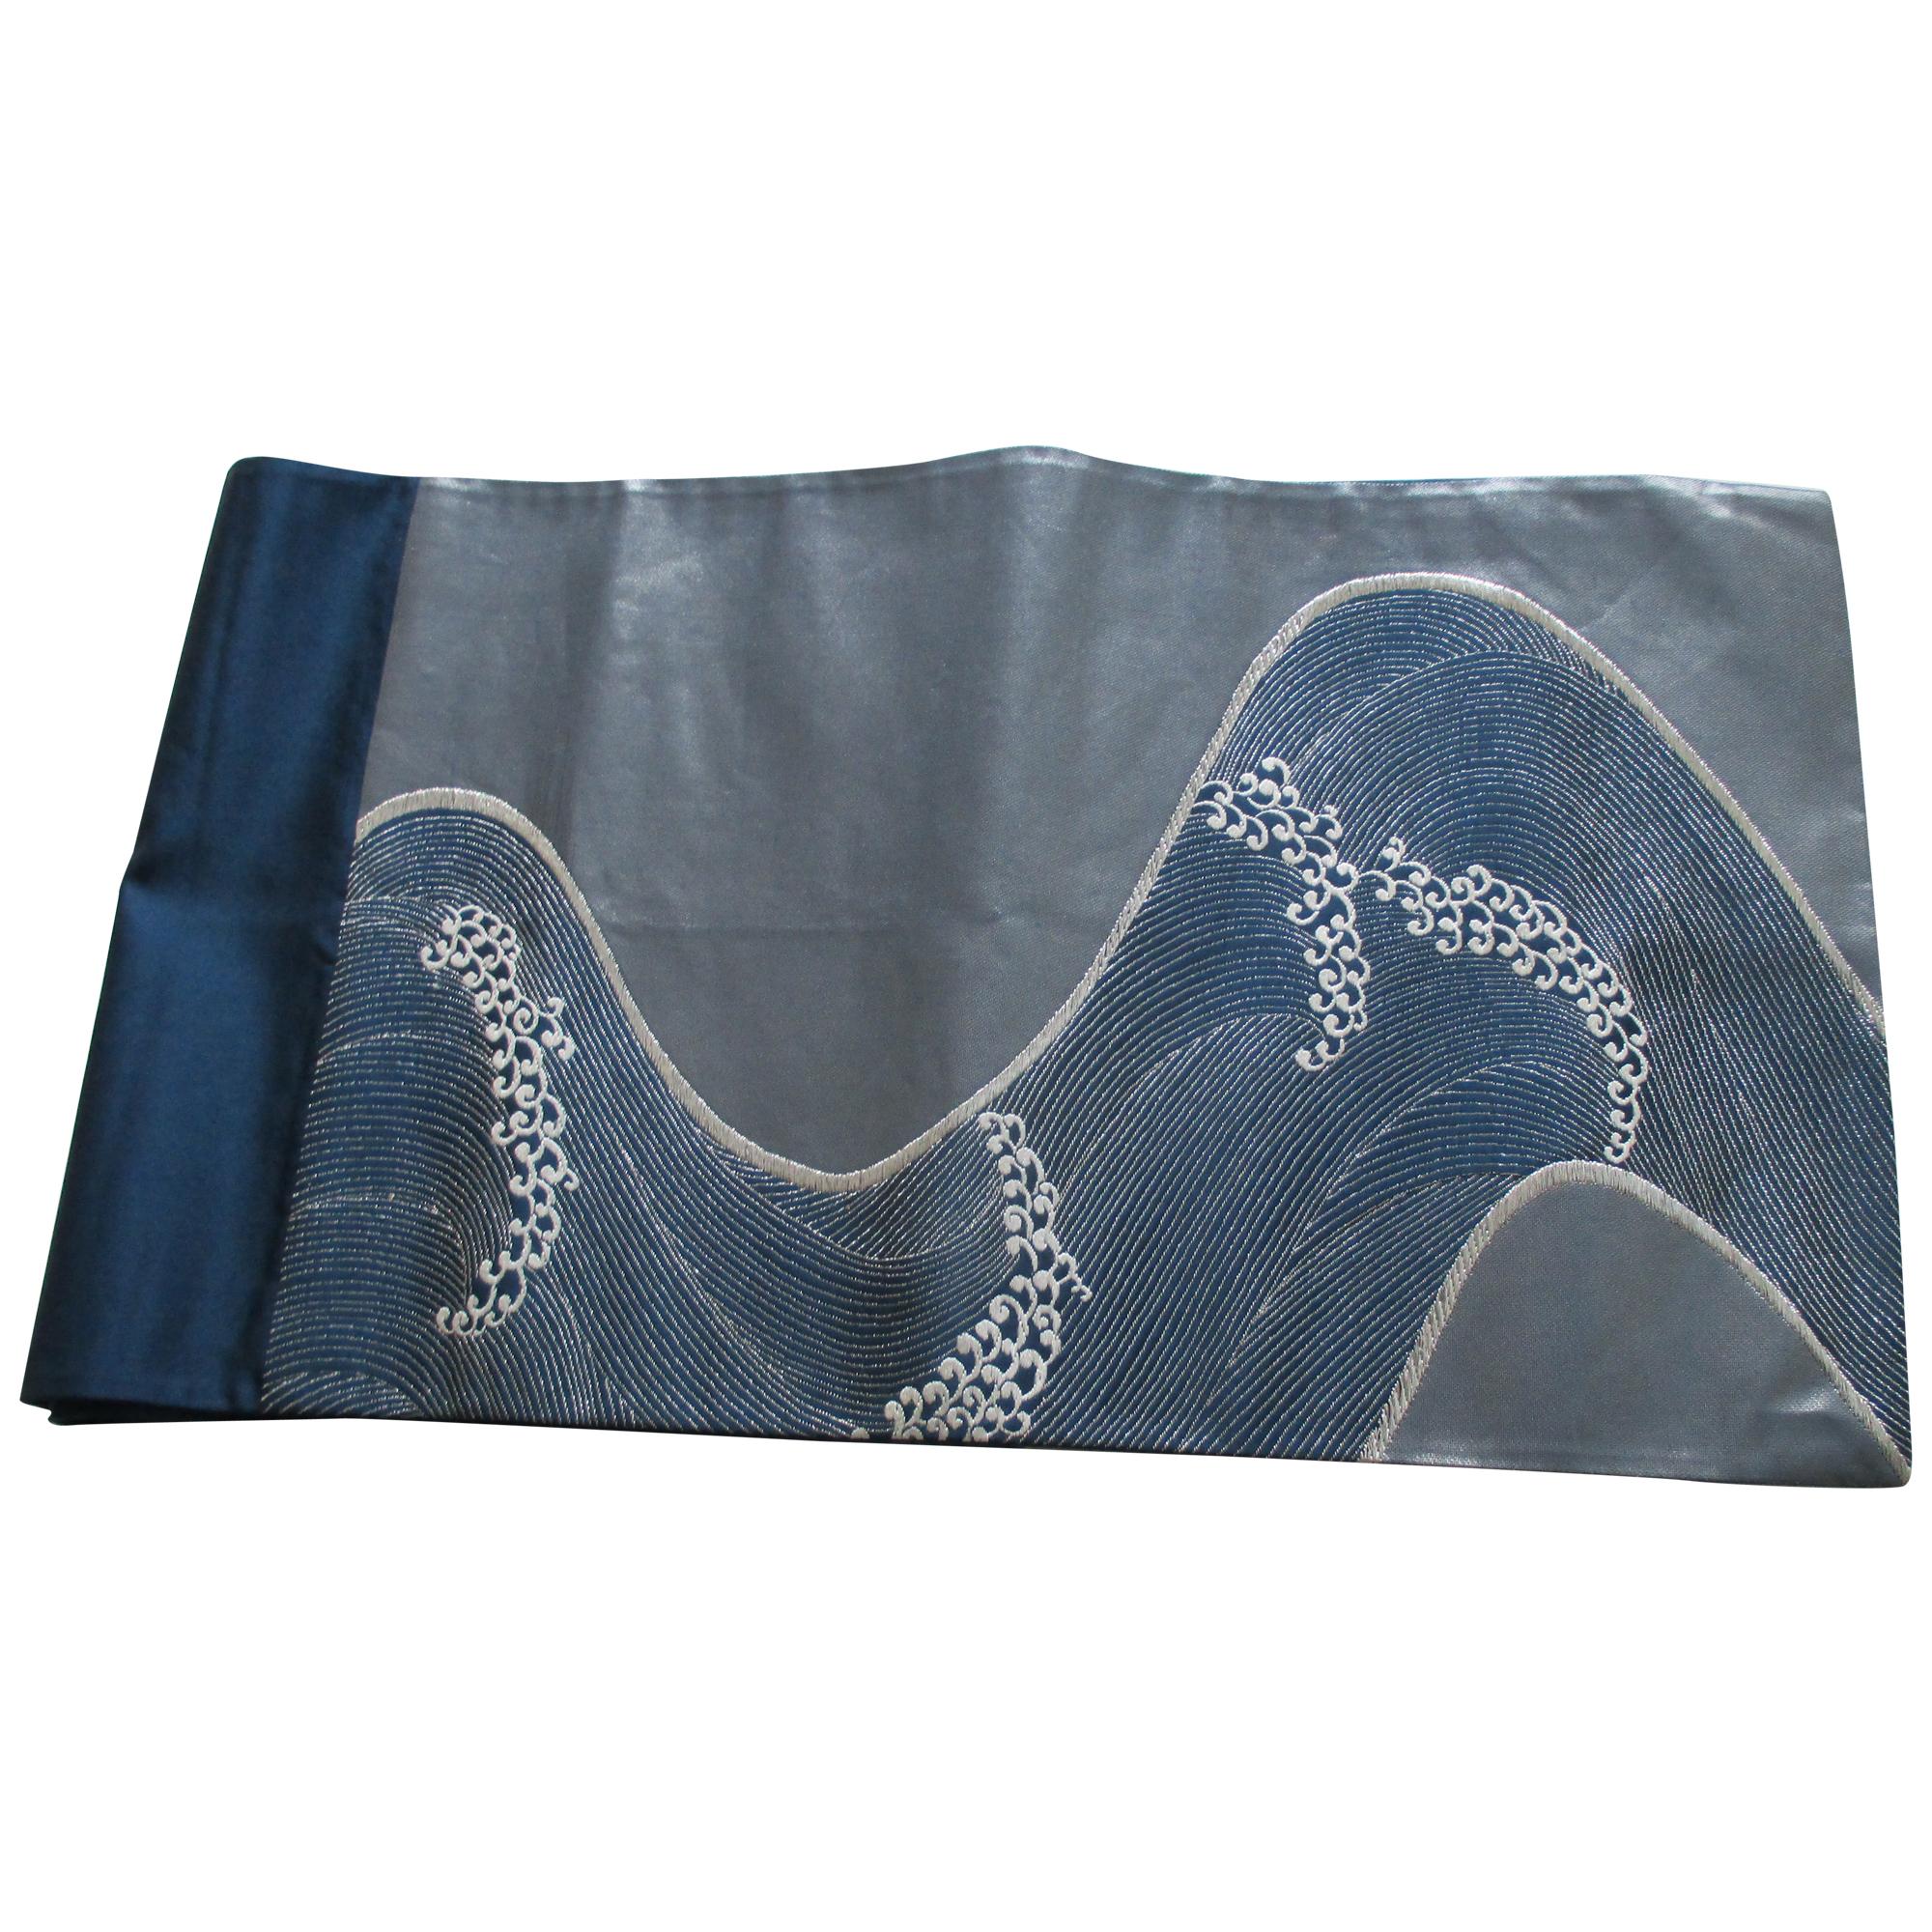 Obi Textile with Gray and Silver Waves Pattern